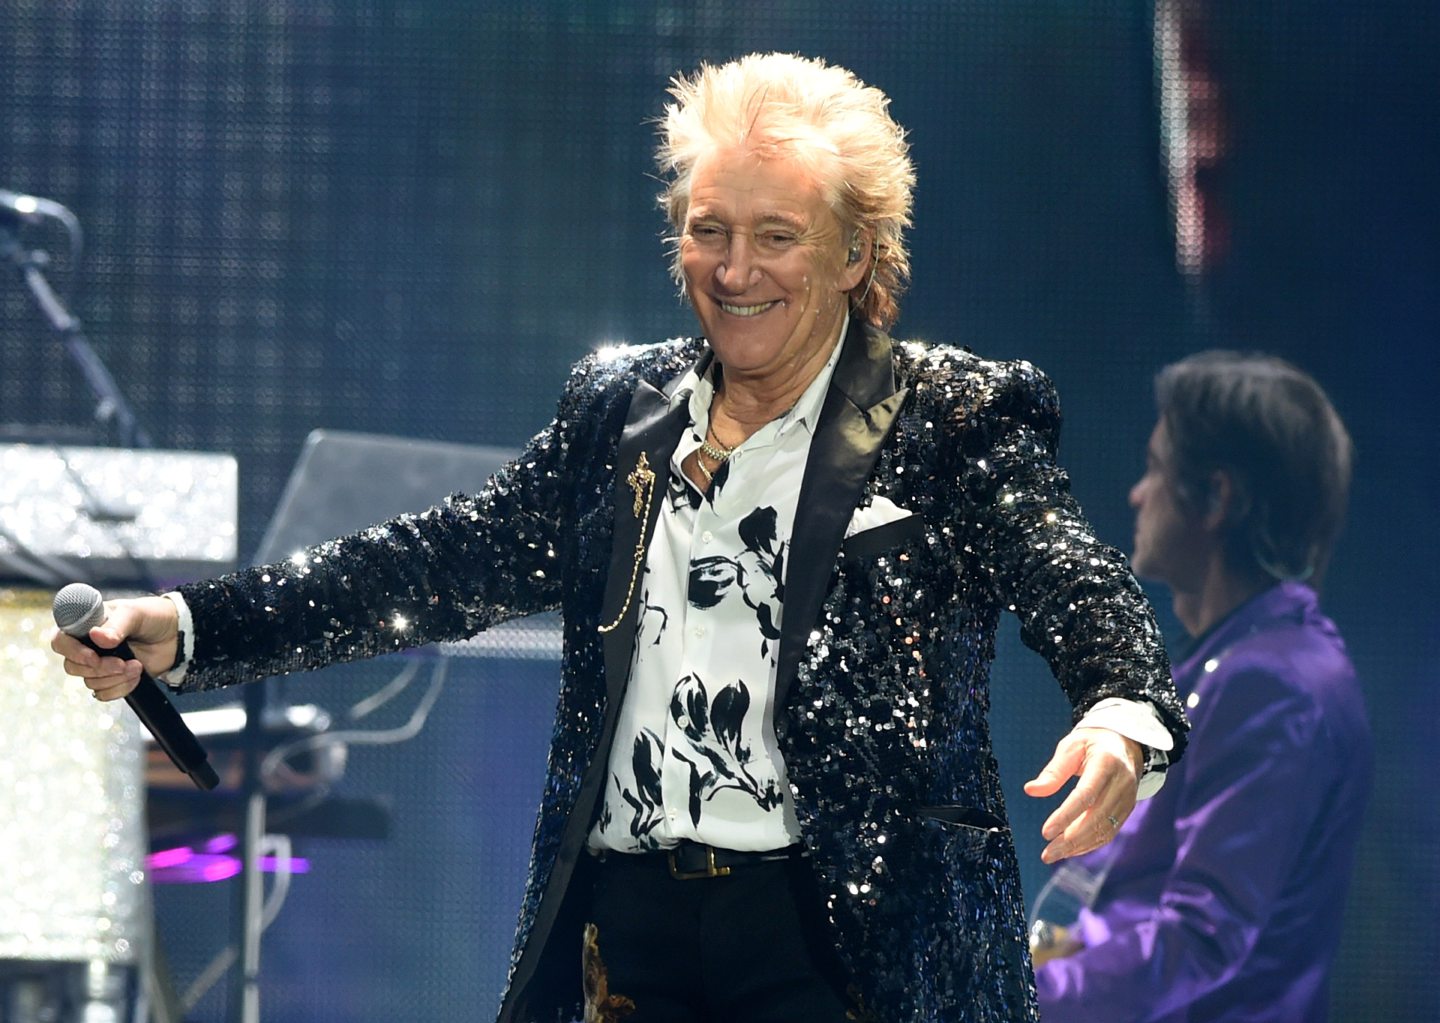 Rod Stewart performing live on stage